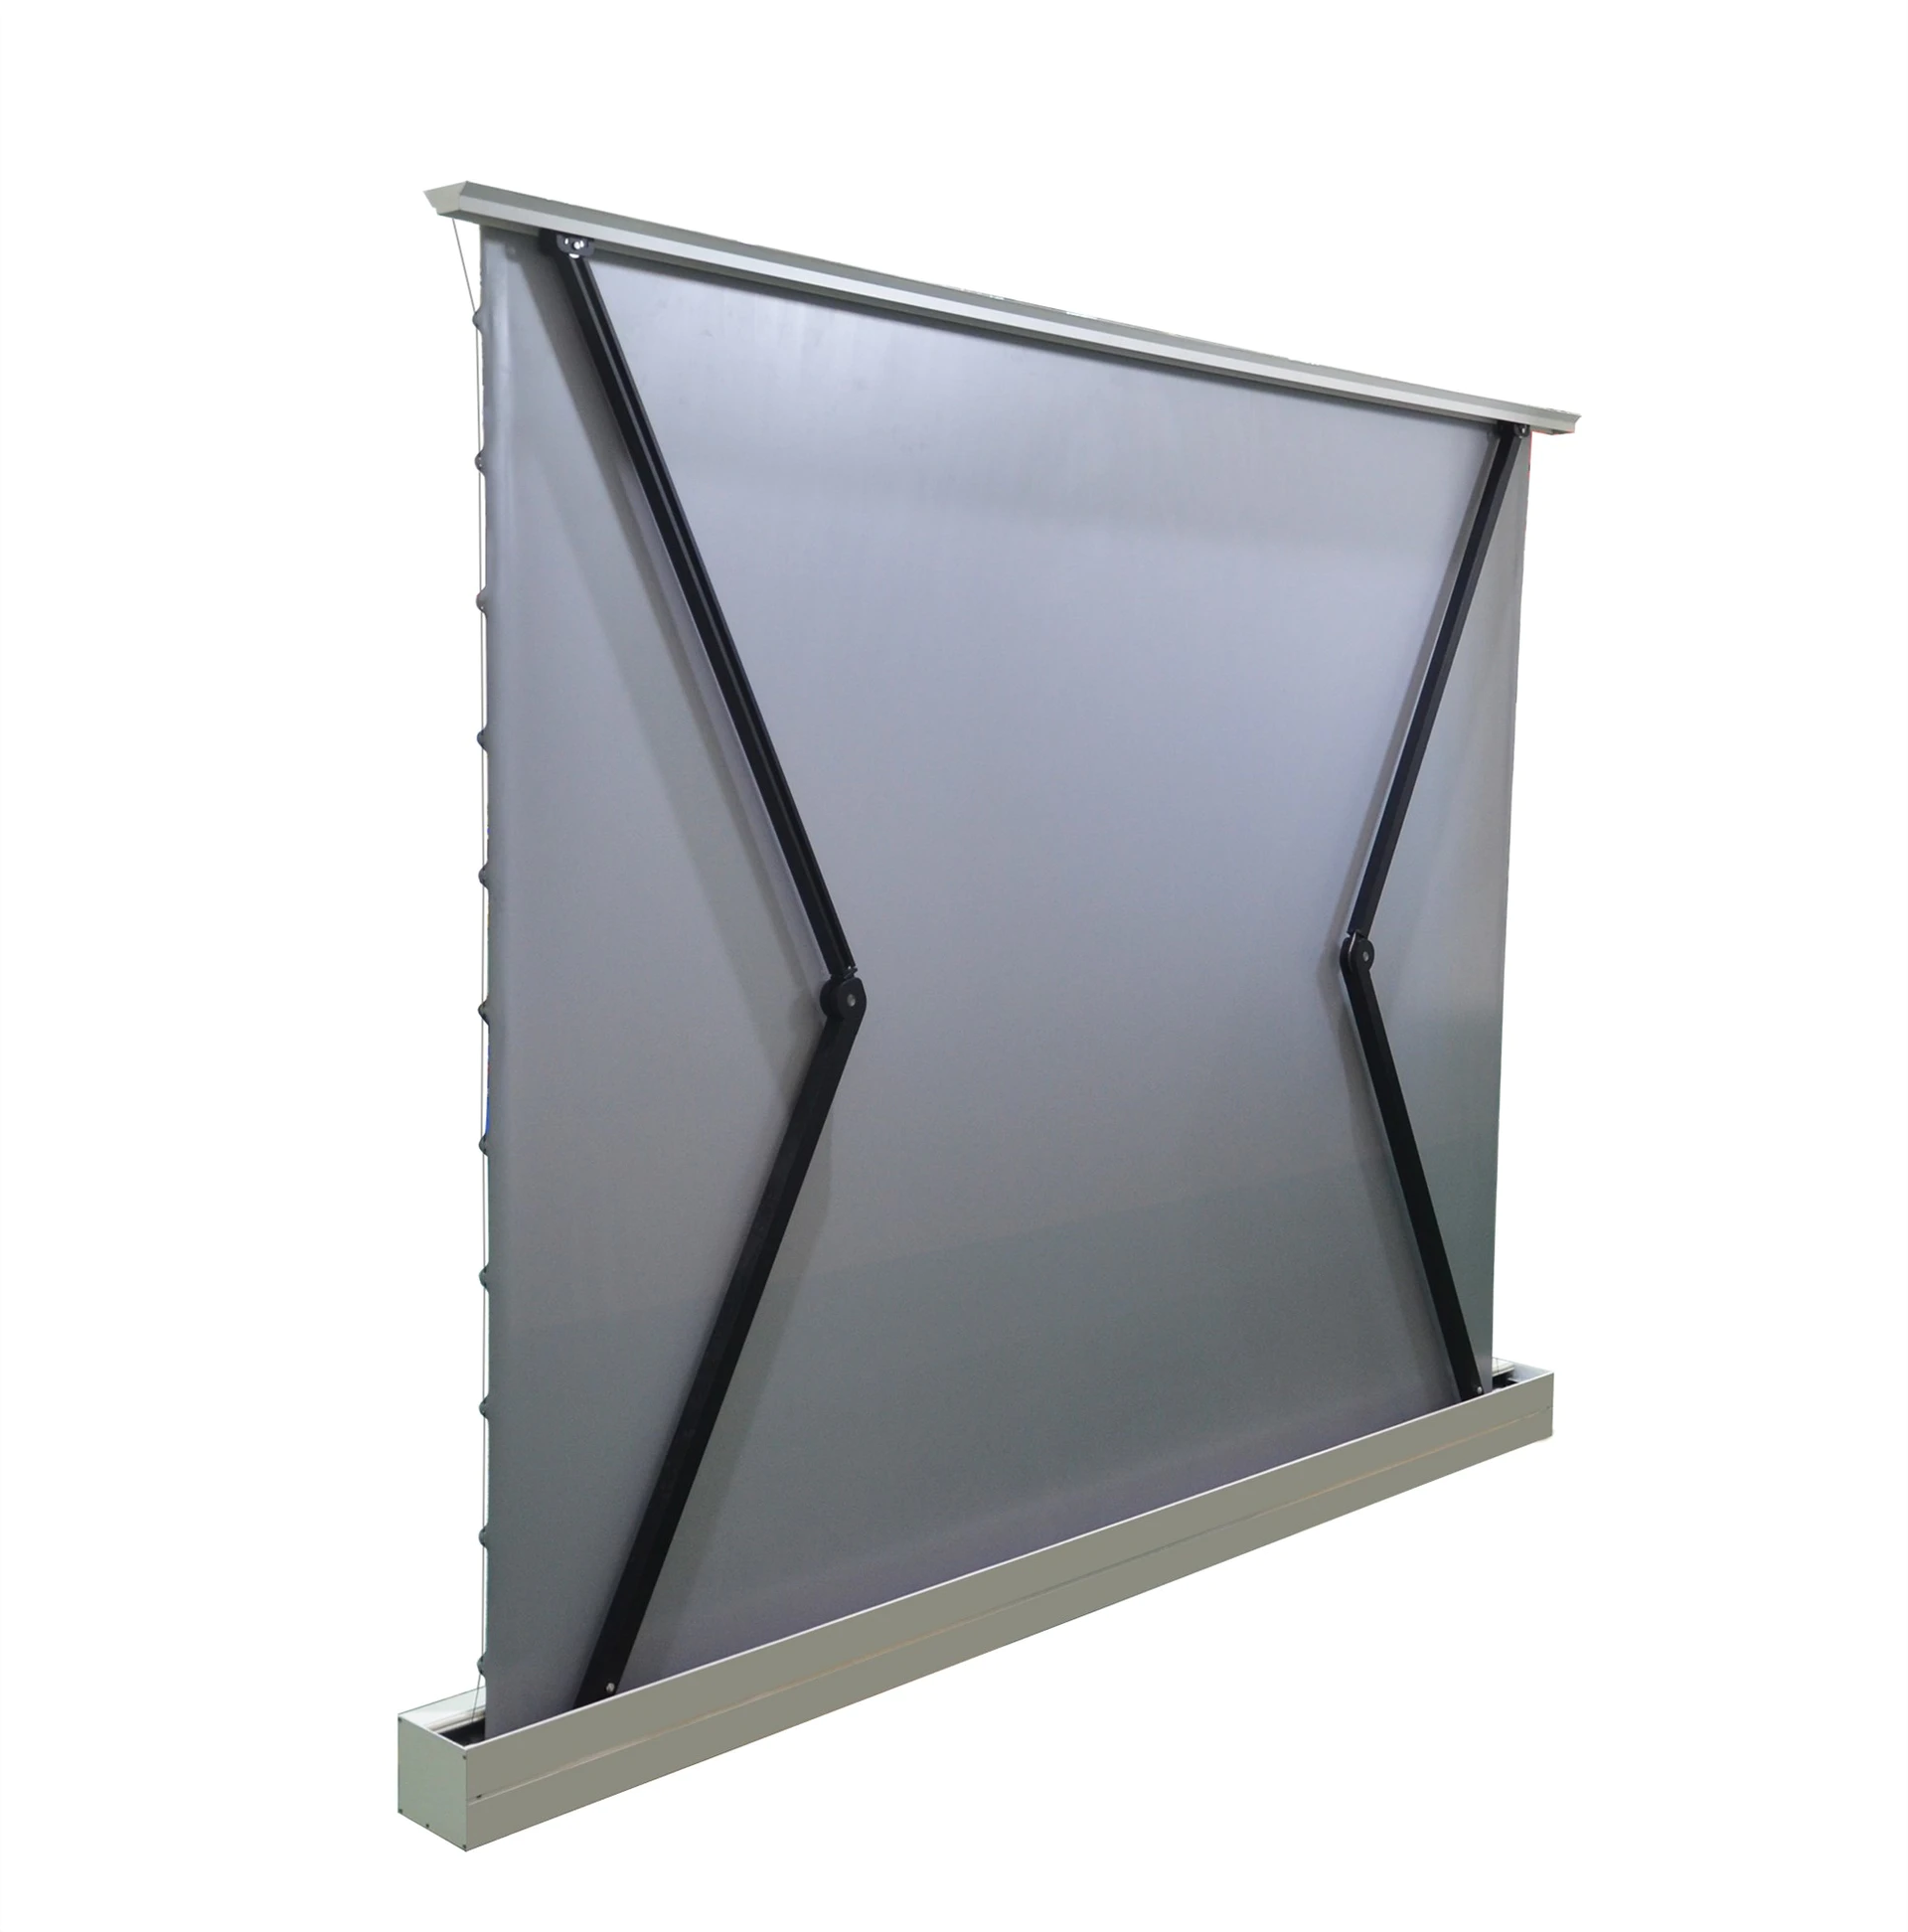 XY Screens portable pull up projector screen design for household